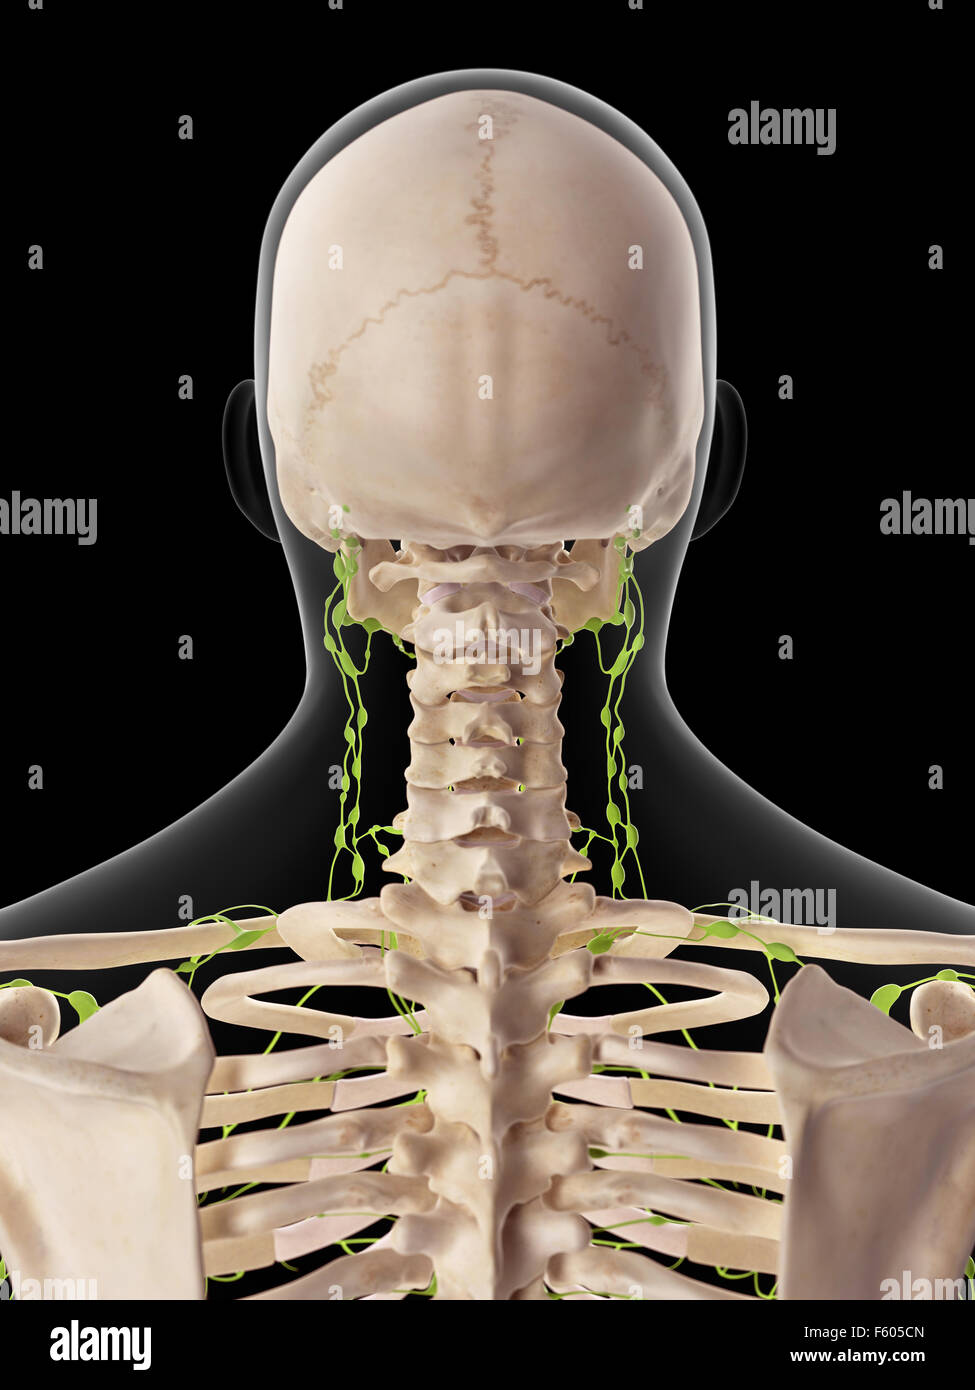 Cervical Lymph Nodes High Resolution Stock Photography And Images Alamy